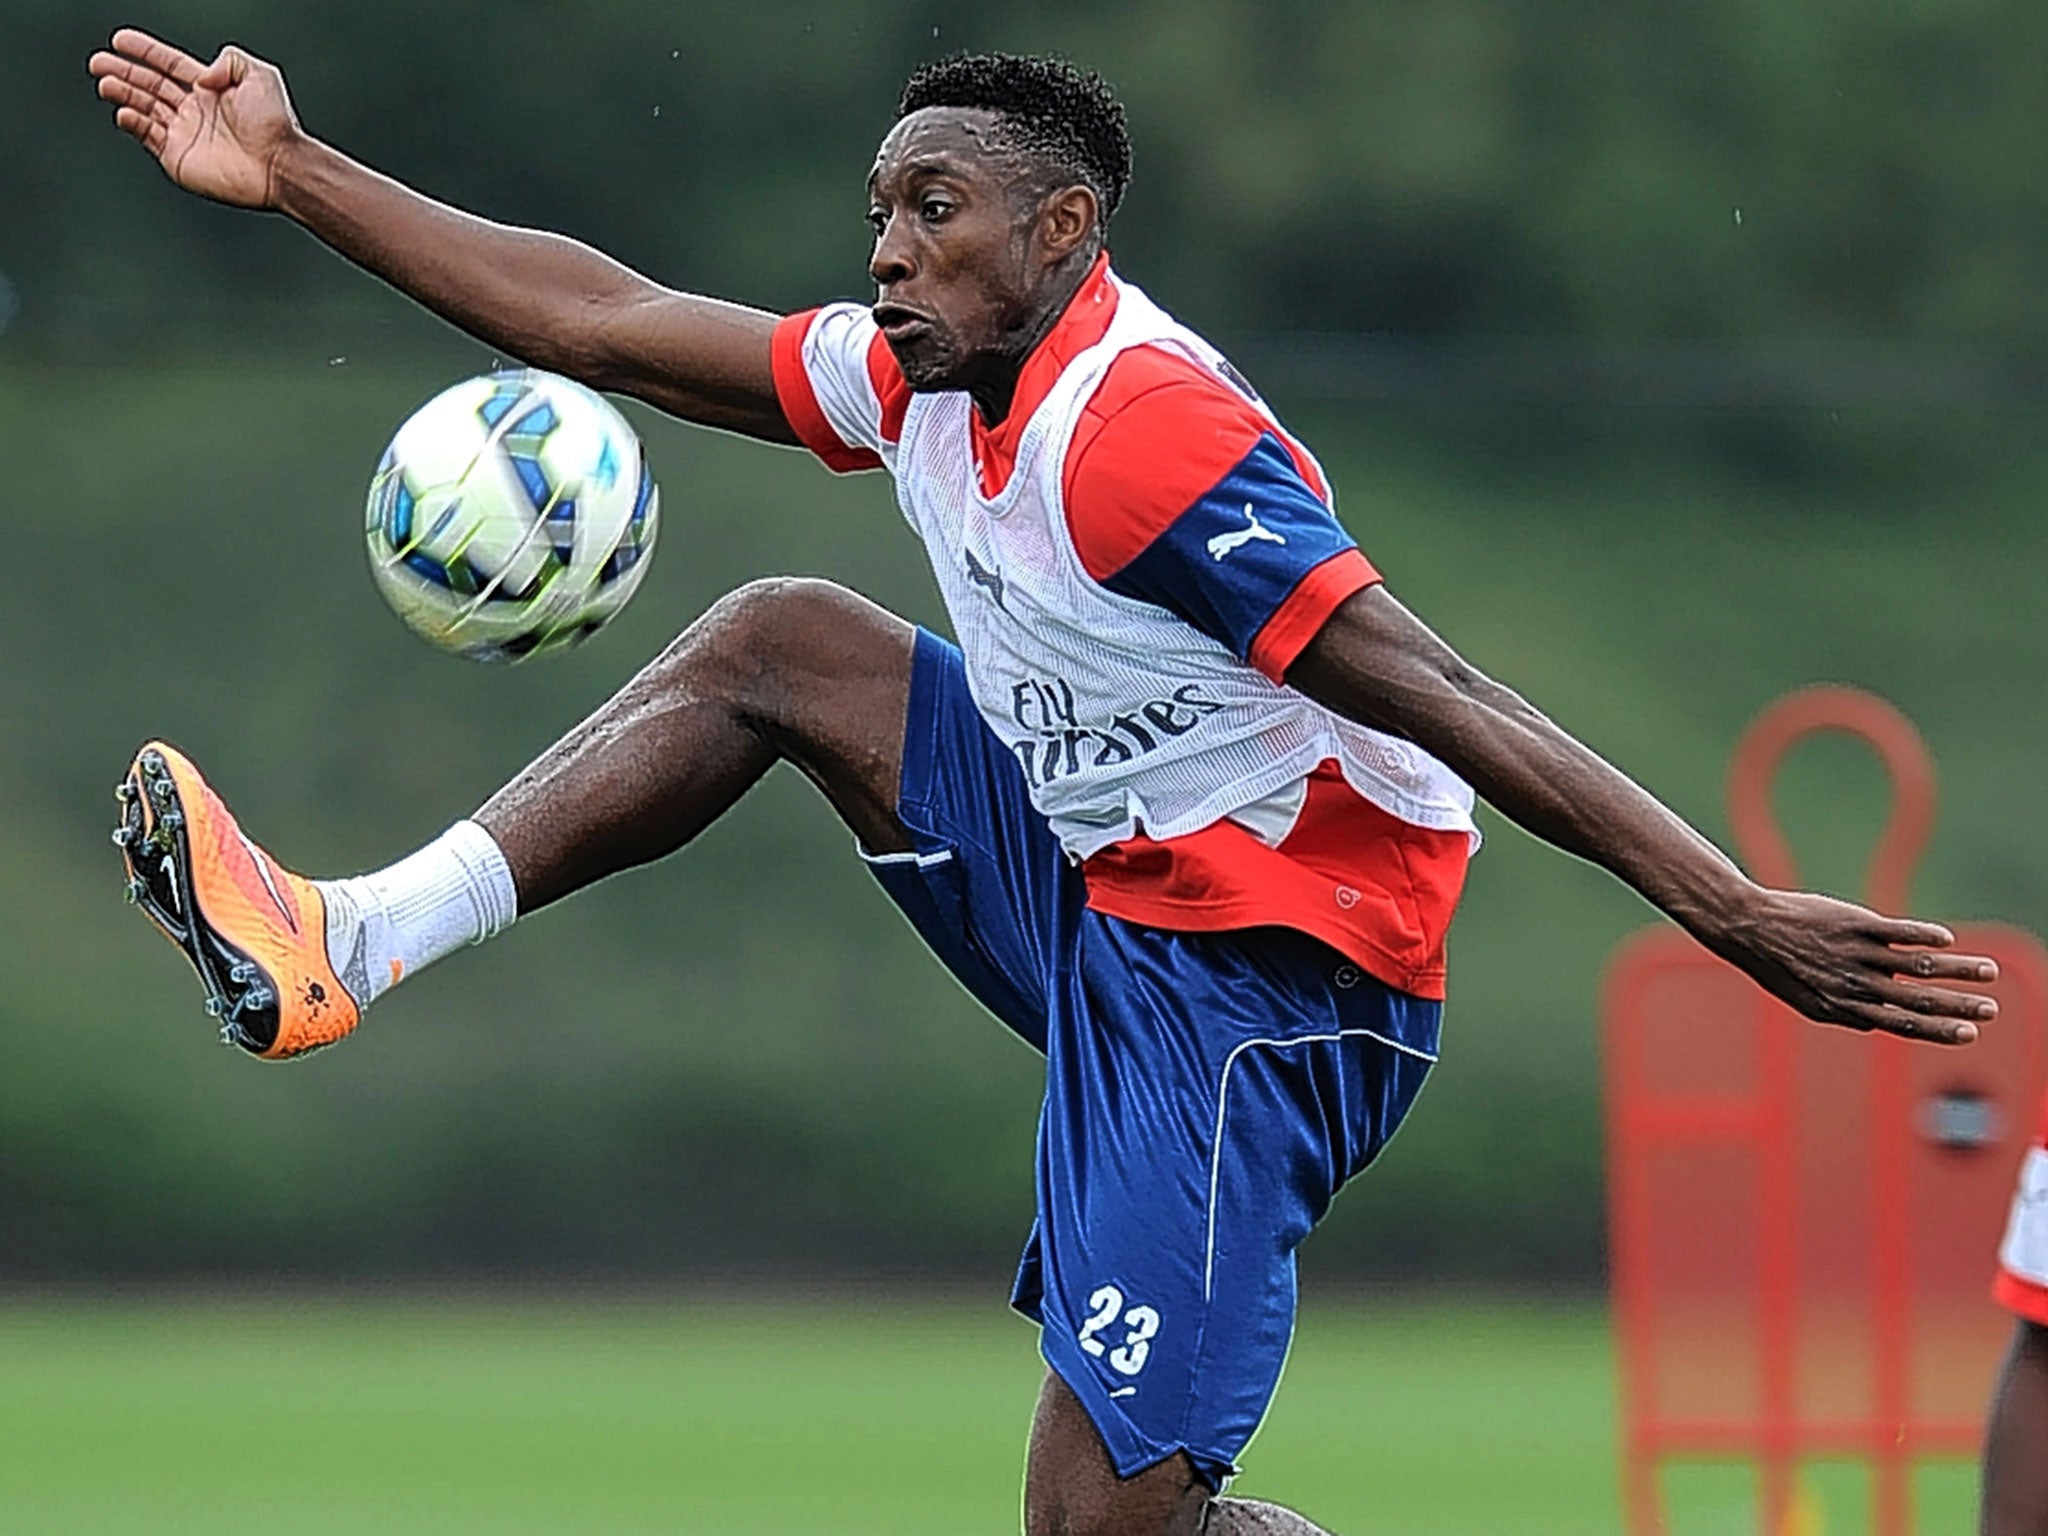 Danny Welbeck trains this week with new club Arsenal